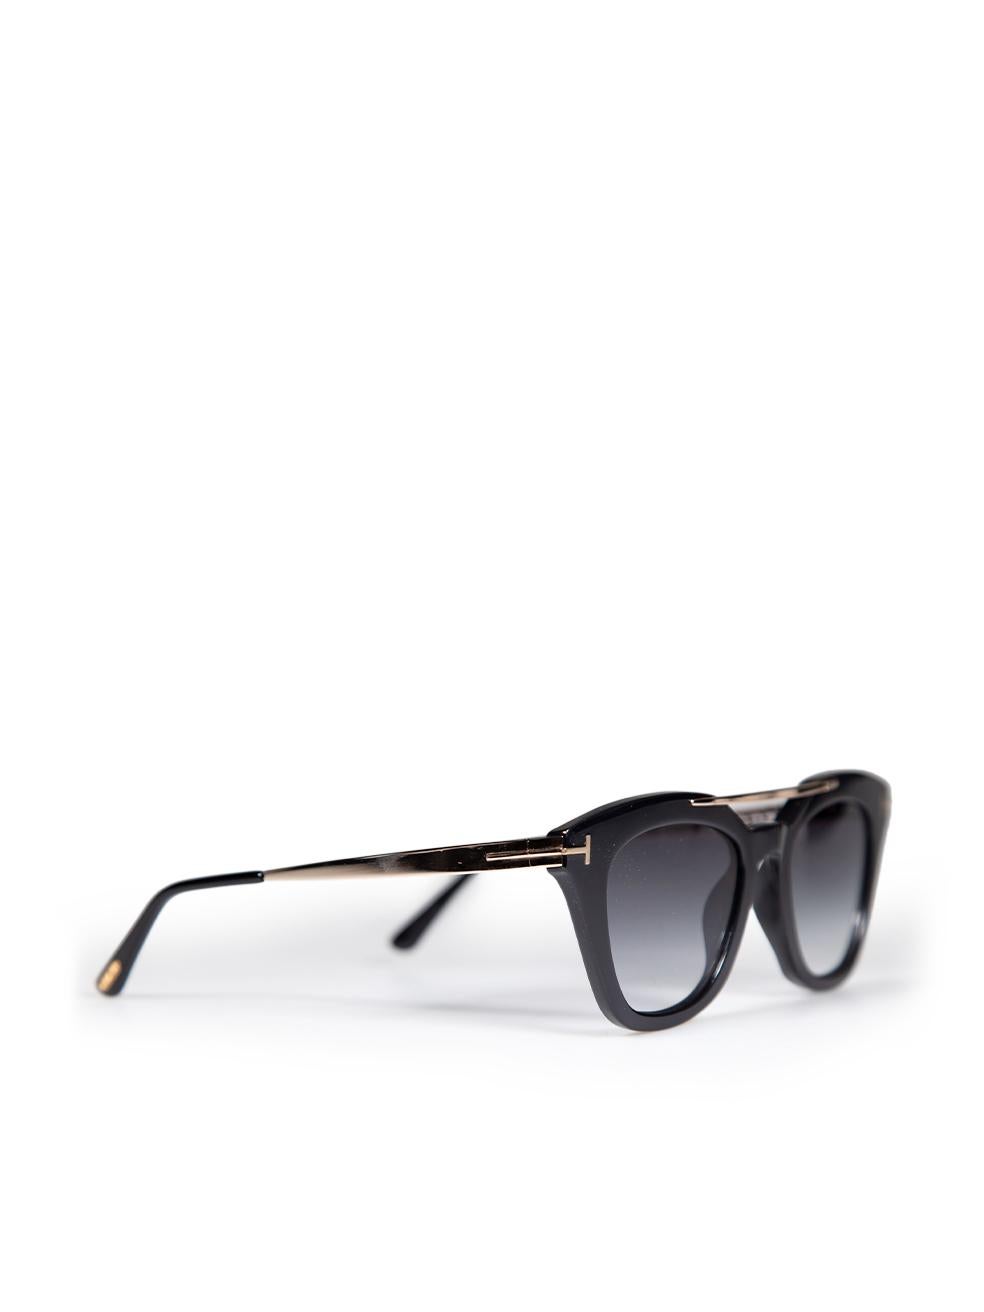 Tom Ford Shiny Black Anna Square Sunglasses In New Condition For Sale In London, GB